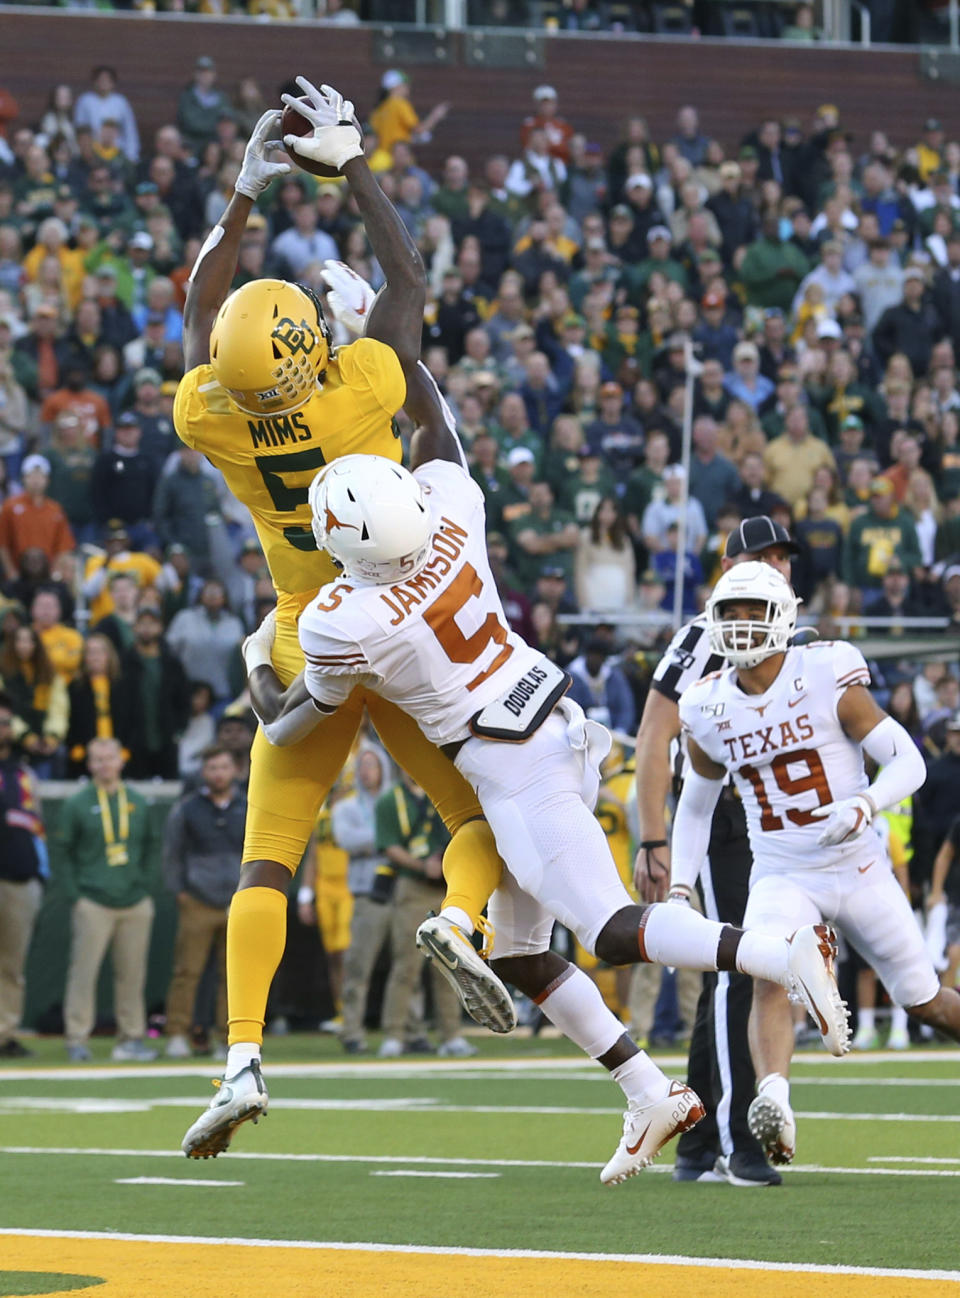 Baylor wide receiver Denzel Mims (5) makes a touchdown reception over Texas defensive back D'Shawn Jamison (5) in the third quarter in an NCAA college football game Saturday, Nov. 23, 2019, in Waco, Texas. (AP Photo/Richard W. Rodriguez)